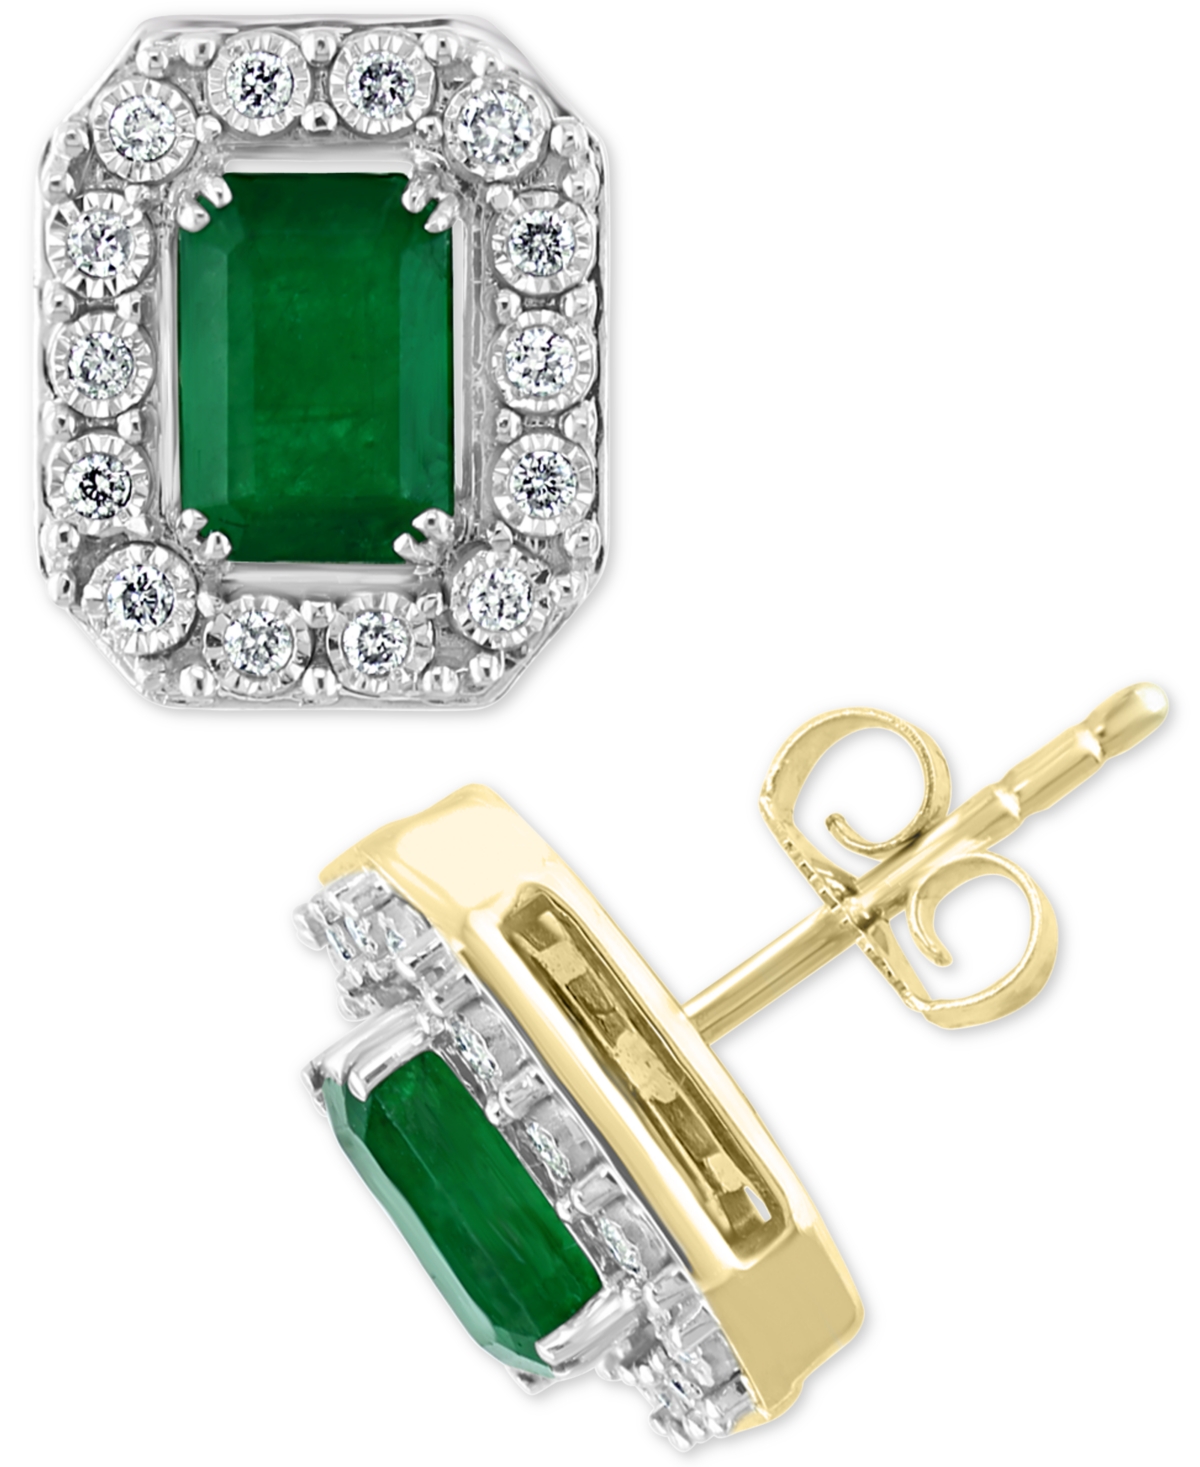 Effy Emerald (1-7/8 ct. t.w.) & Diamond (1/5 ct. t.w.) Earrings in 14k White Gold (Also in Yellow Gold) - Emerald/Yellow Gold